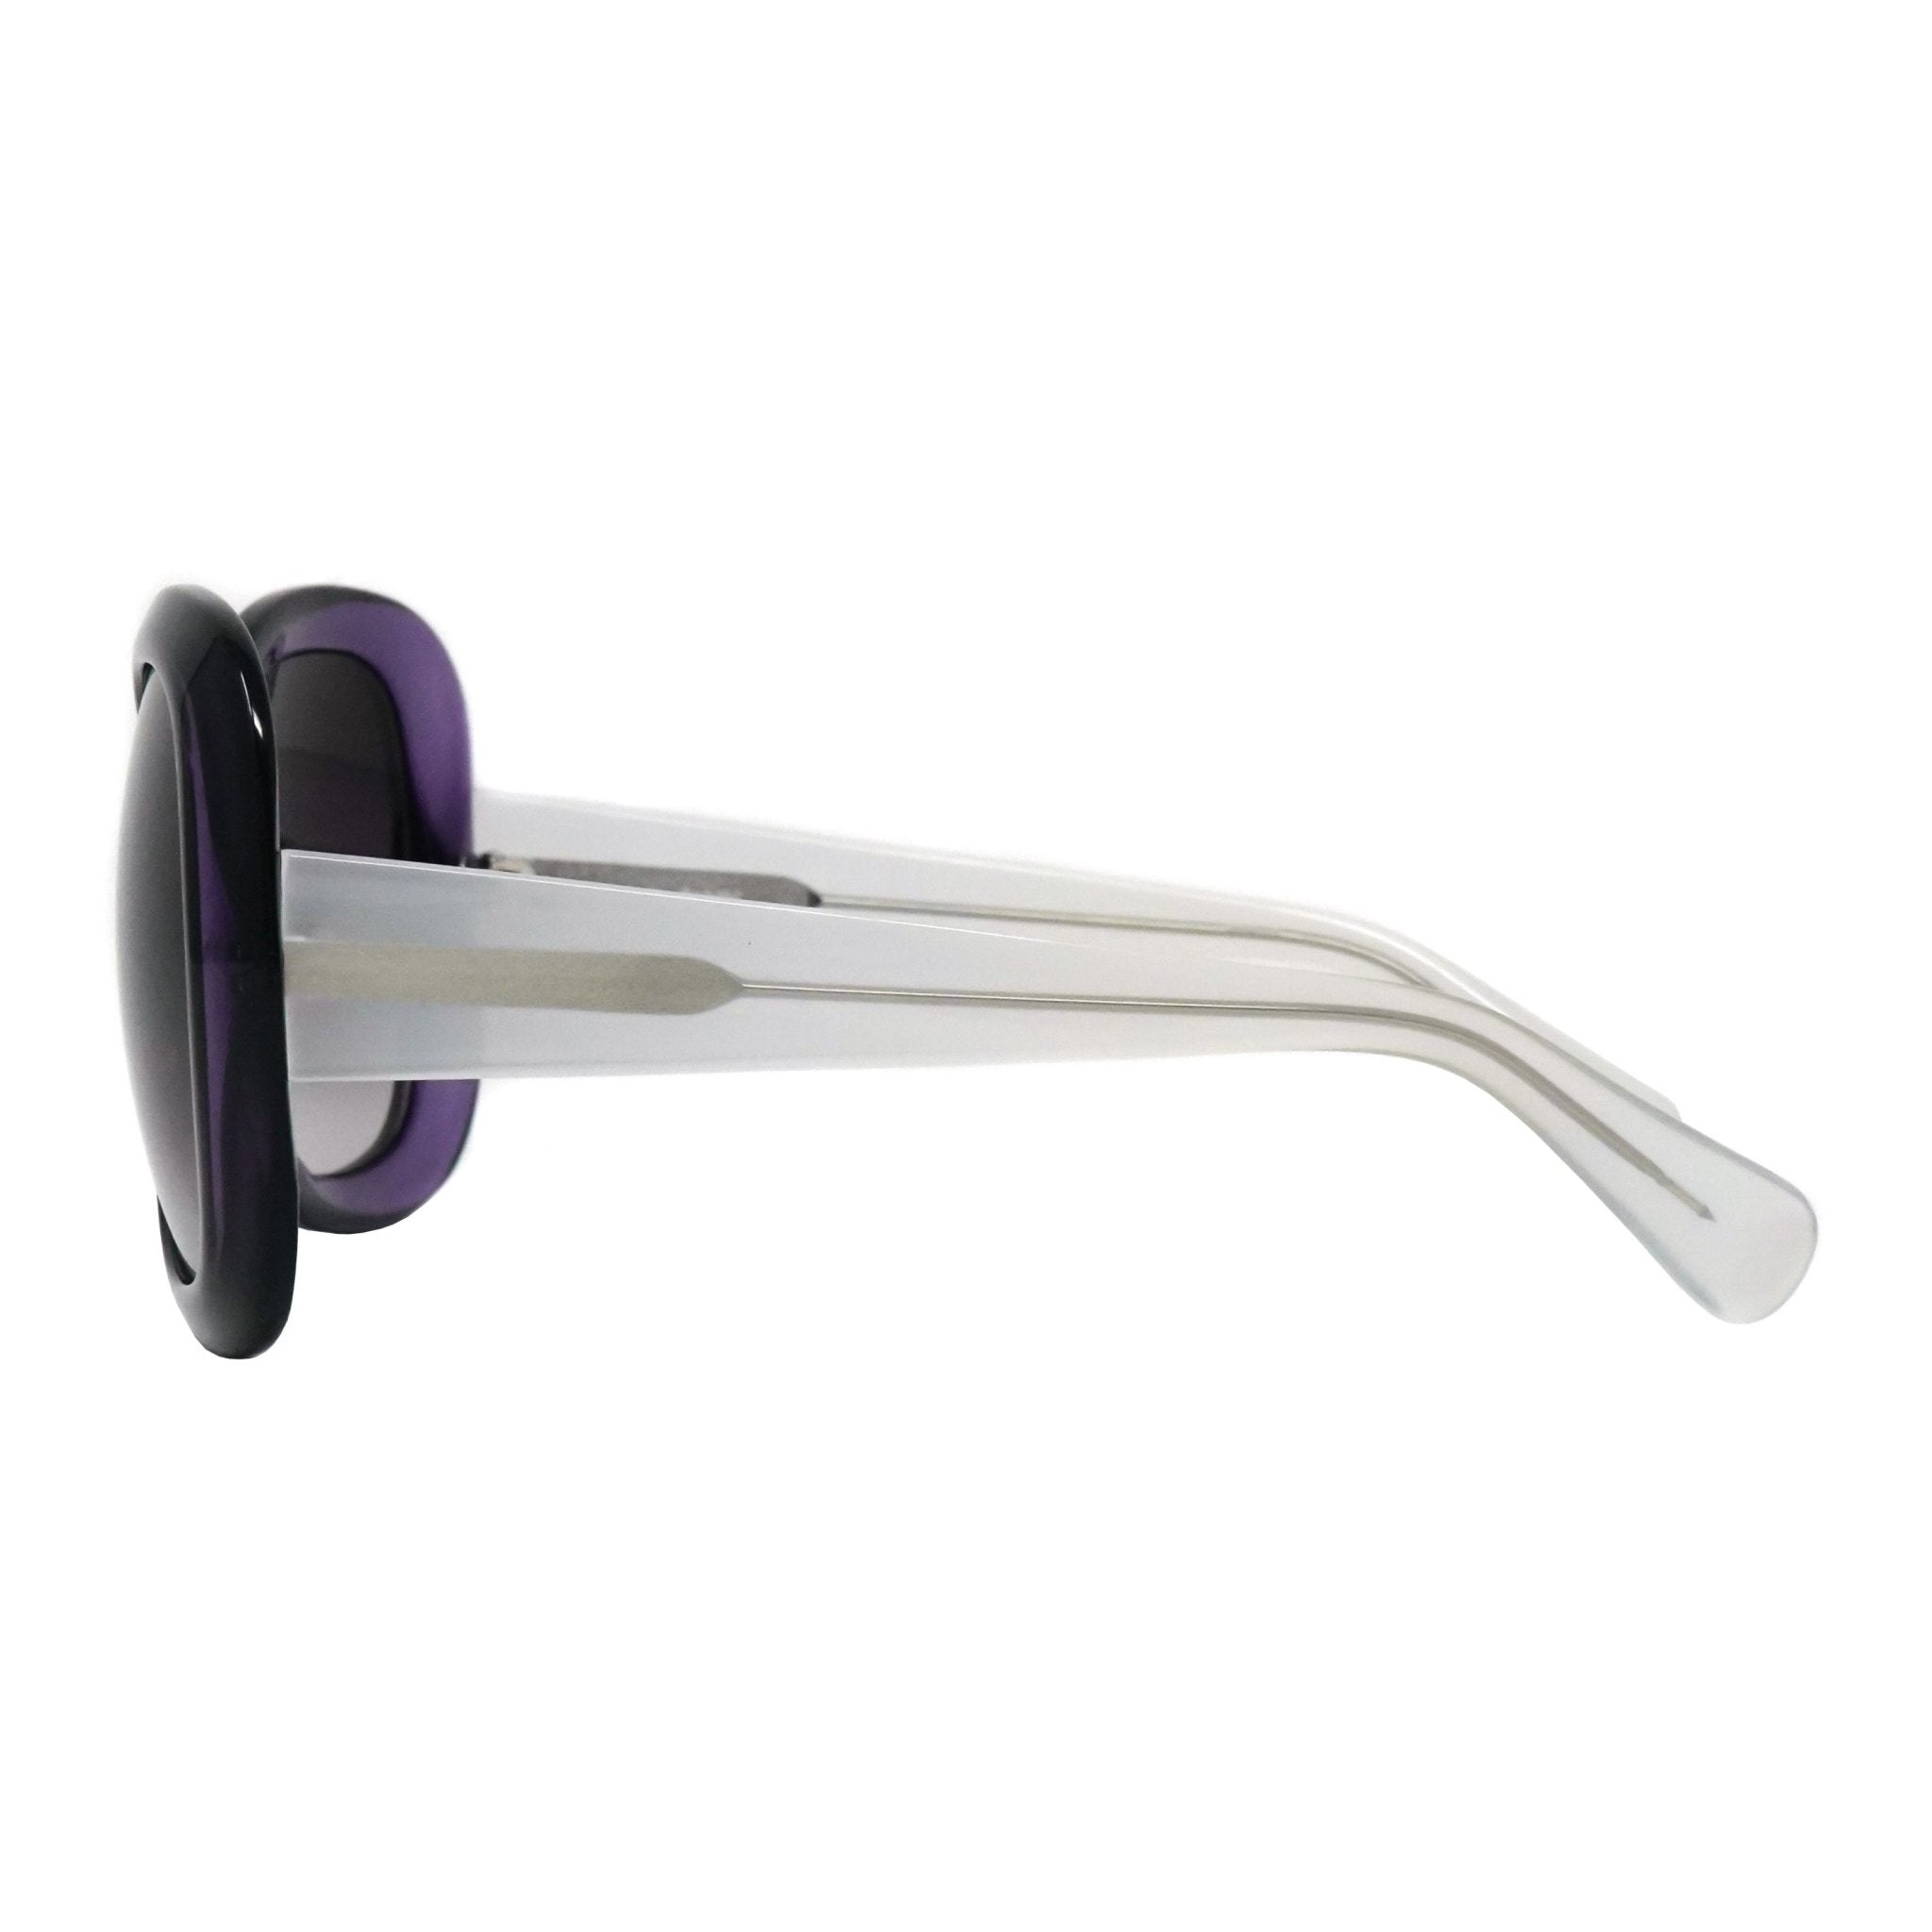 Rue De Mail Sunglasses Oversized Purple and White - Watches & Crystals